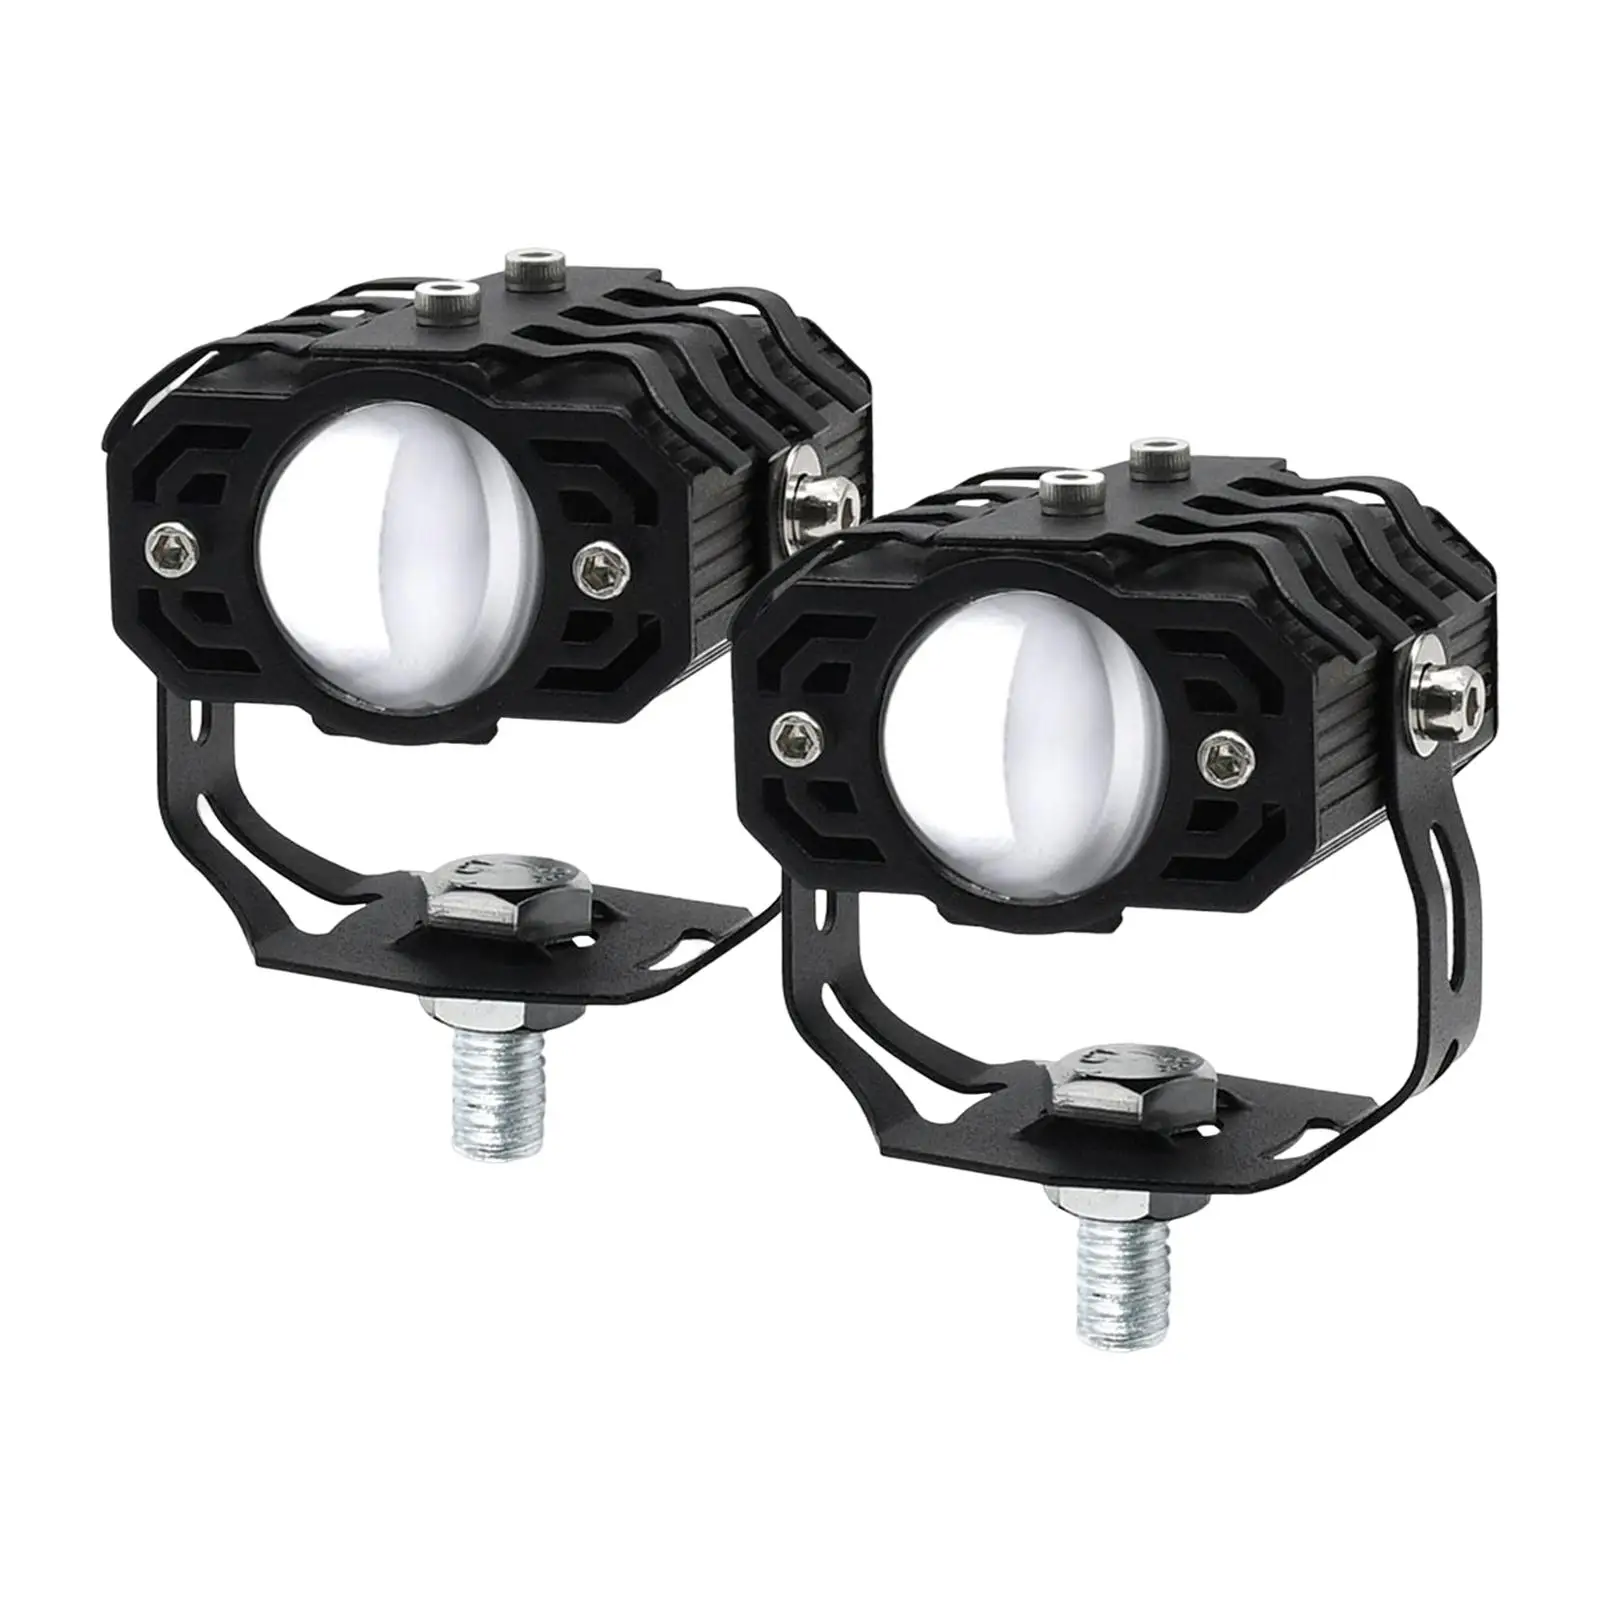 2x Motorcycle Auxiliary Driving Lights Spotlight White Yellow for ATV